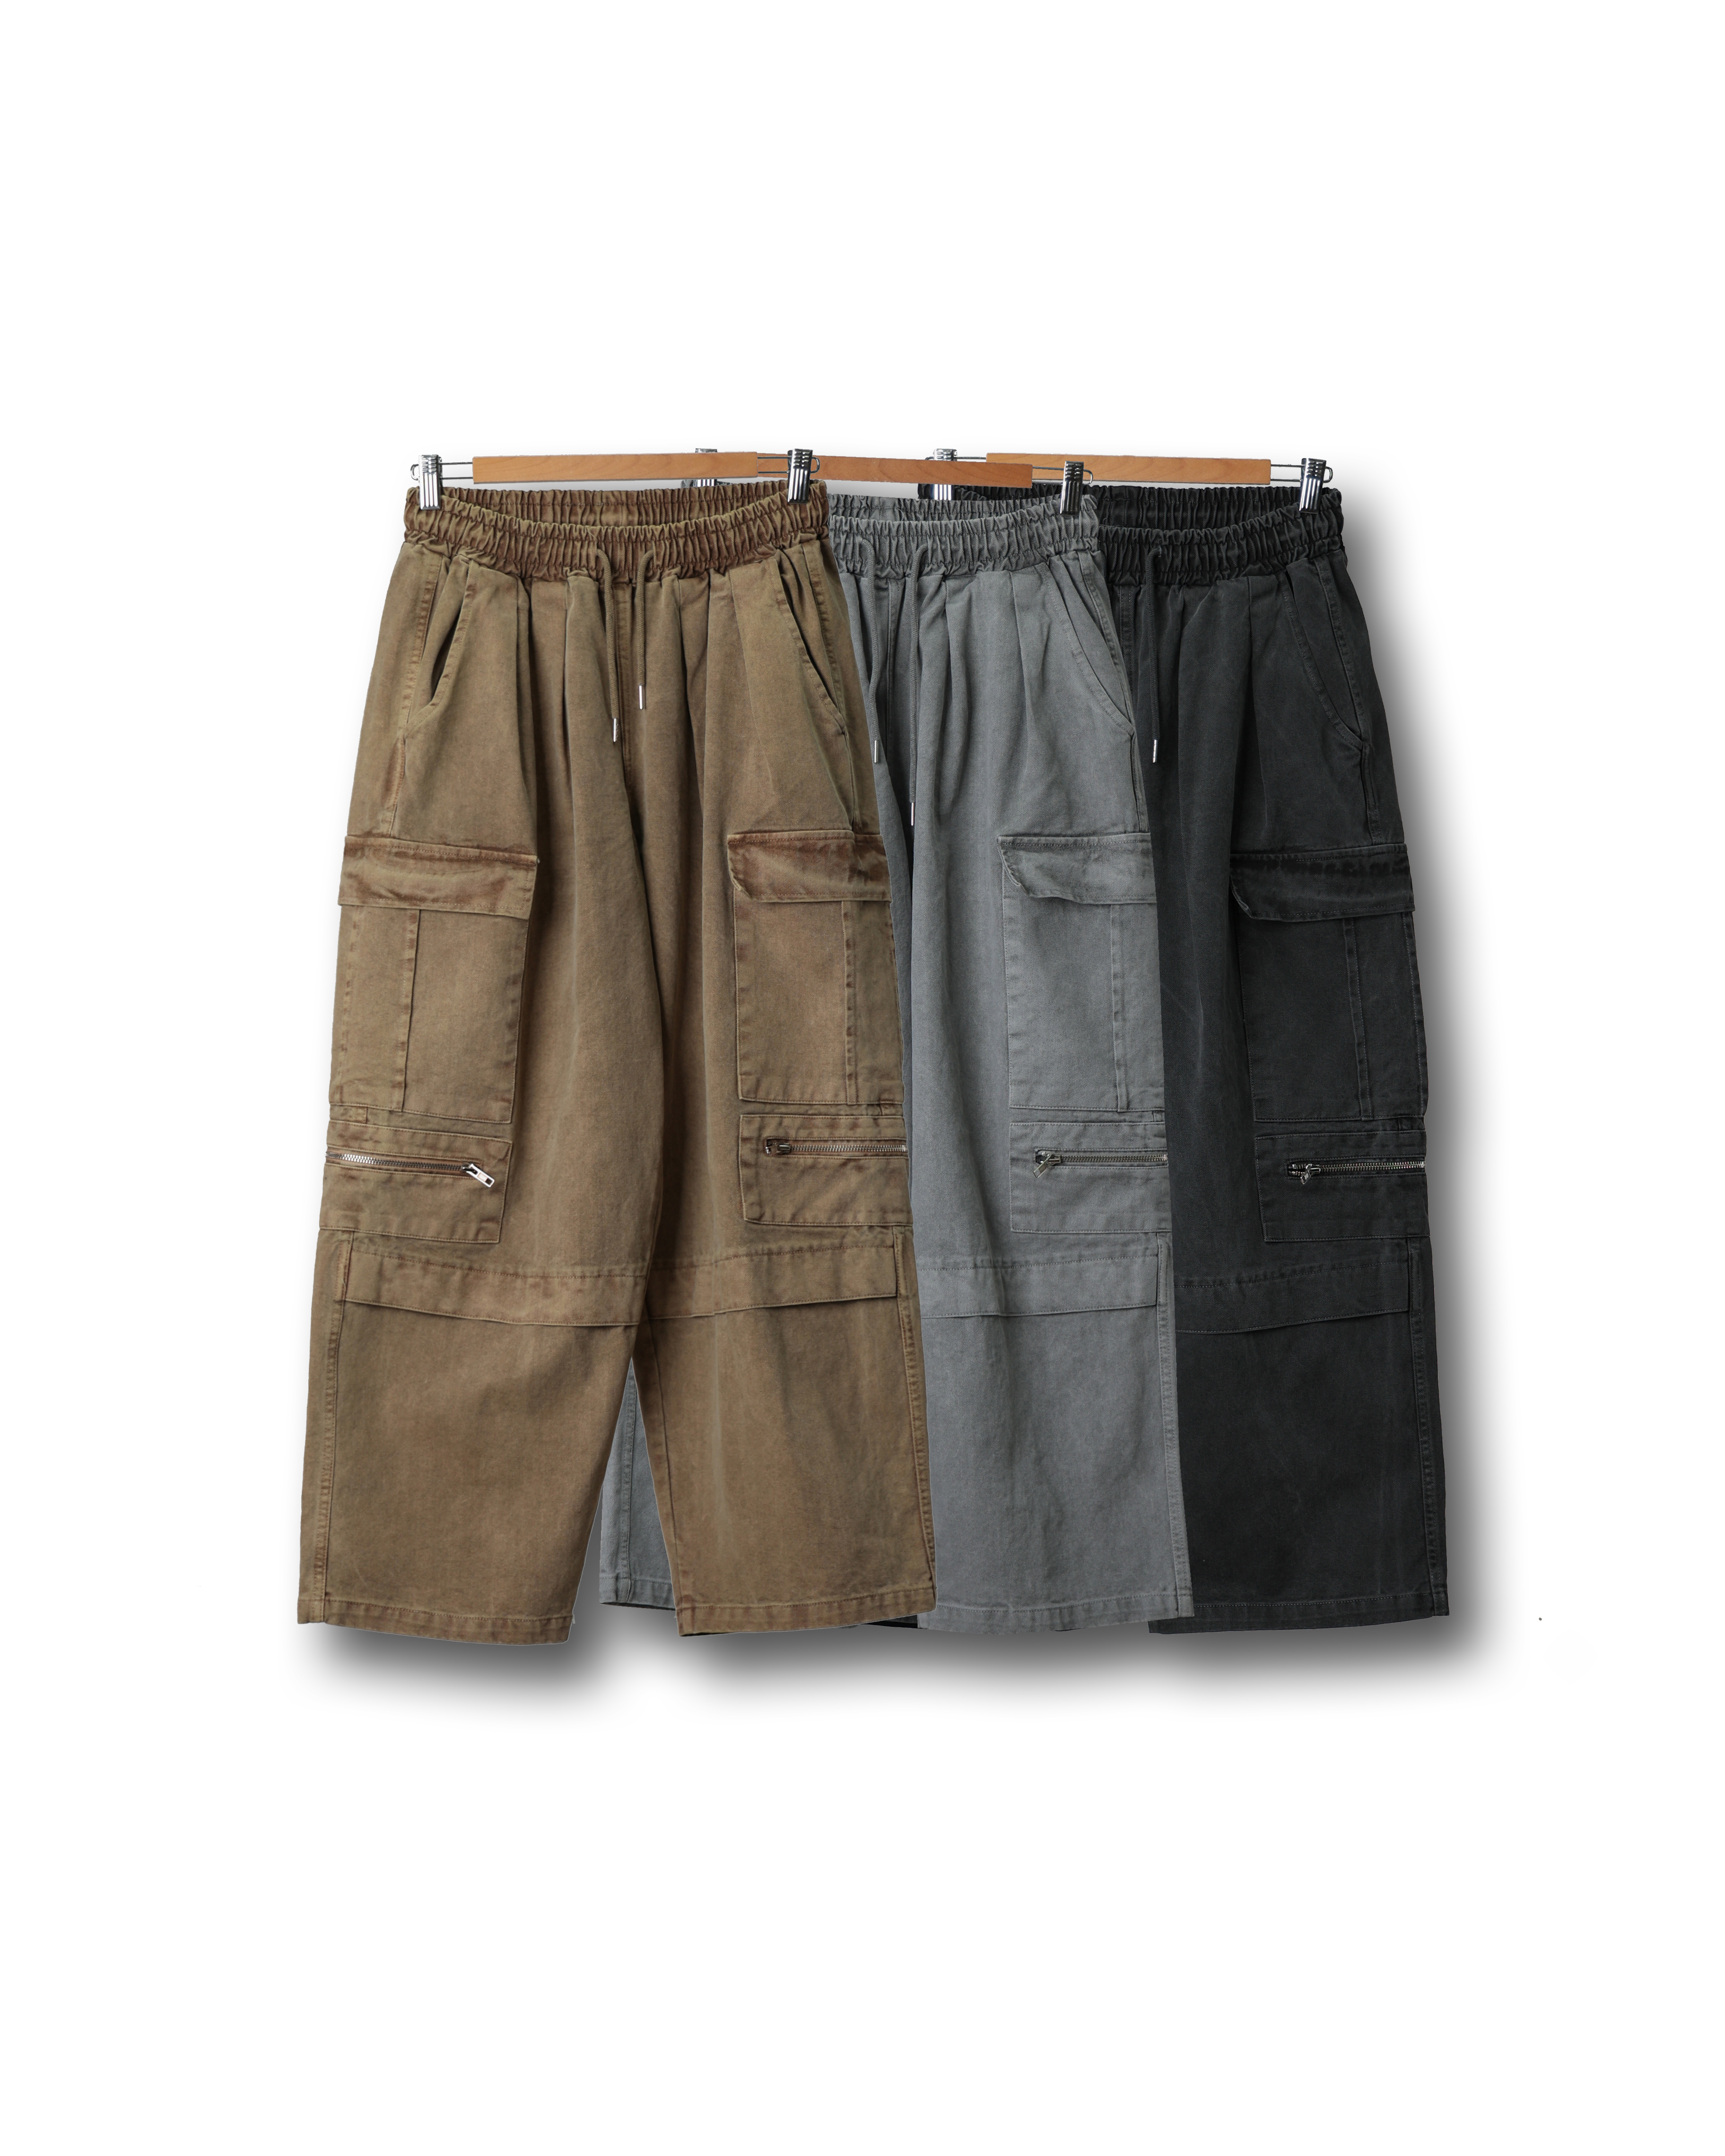 PLGROUND Side Zip Pigments Cargo Pants (Charcoal/Light Gray/Camel Brown)